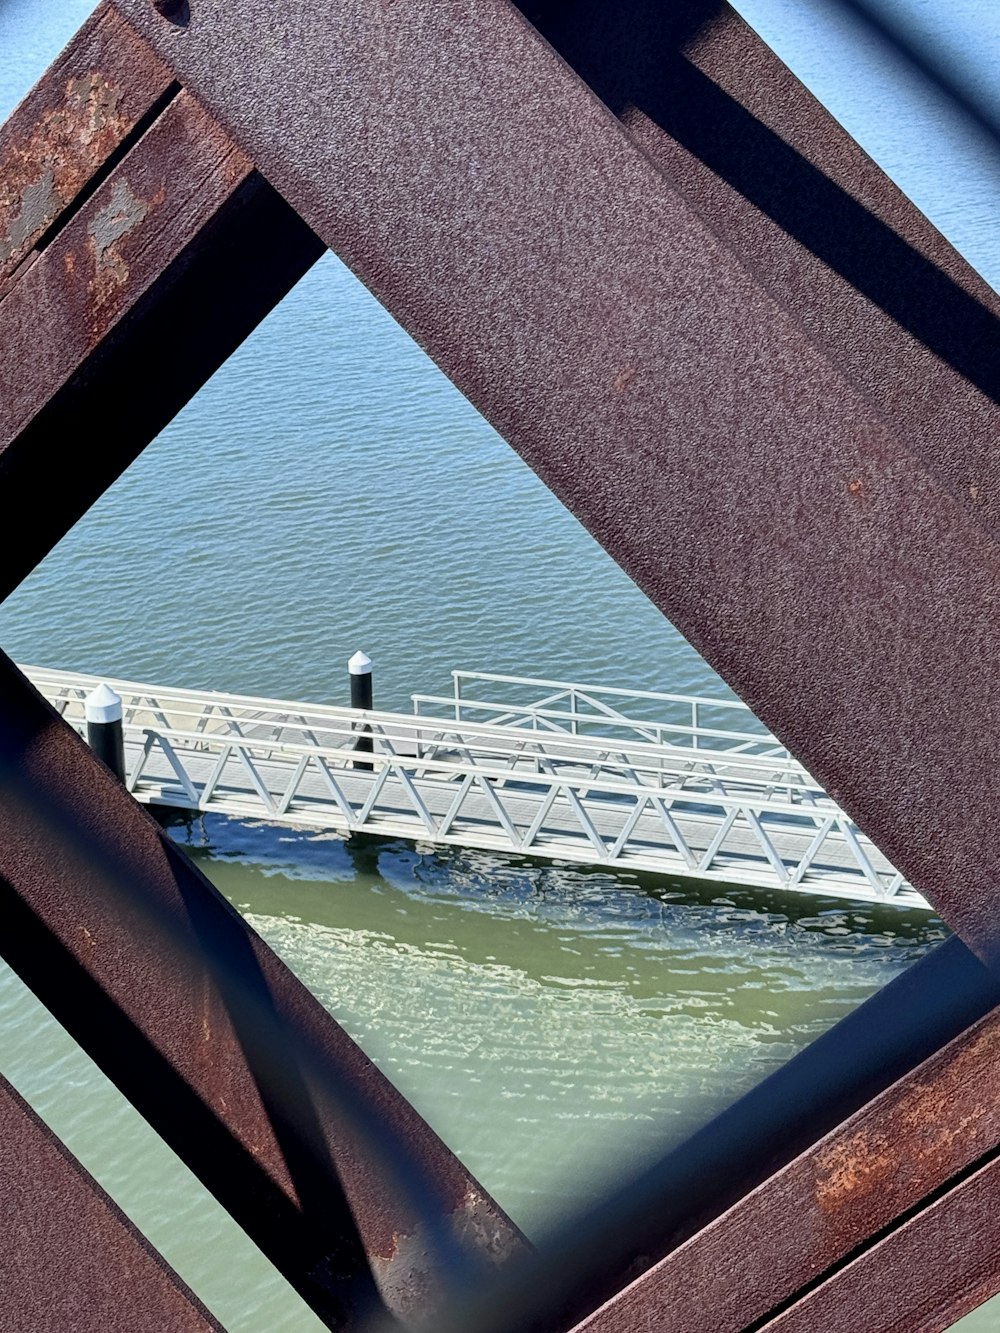 a view of a bridge over a body of water